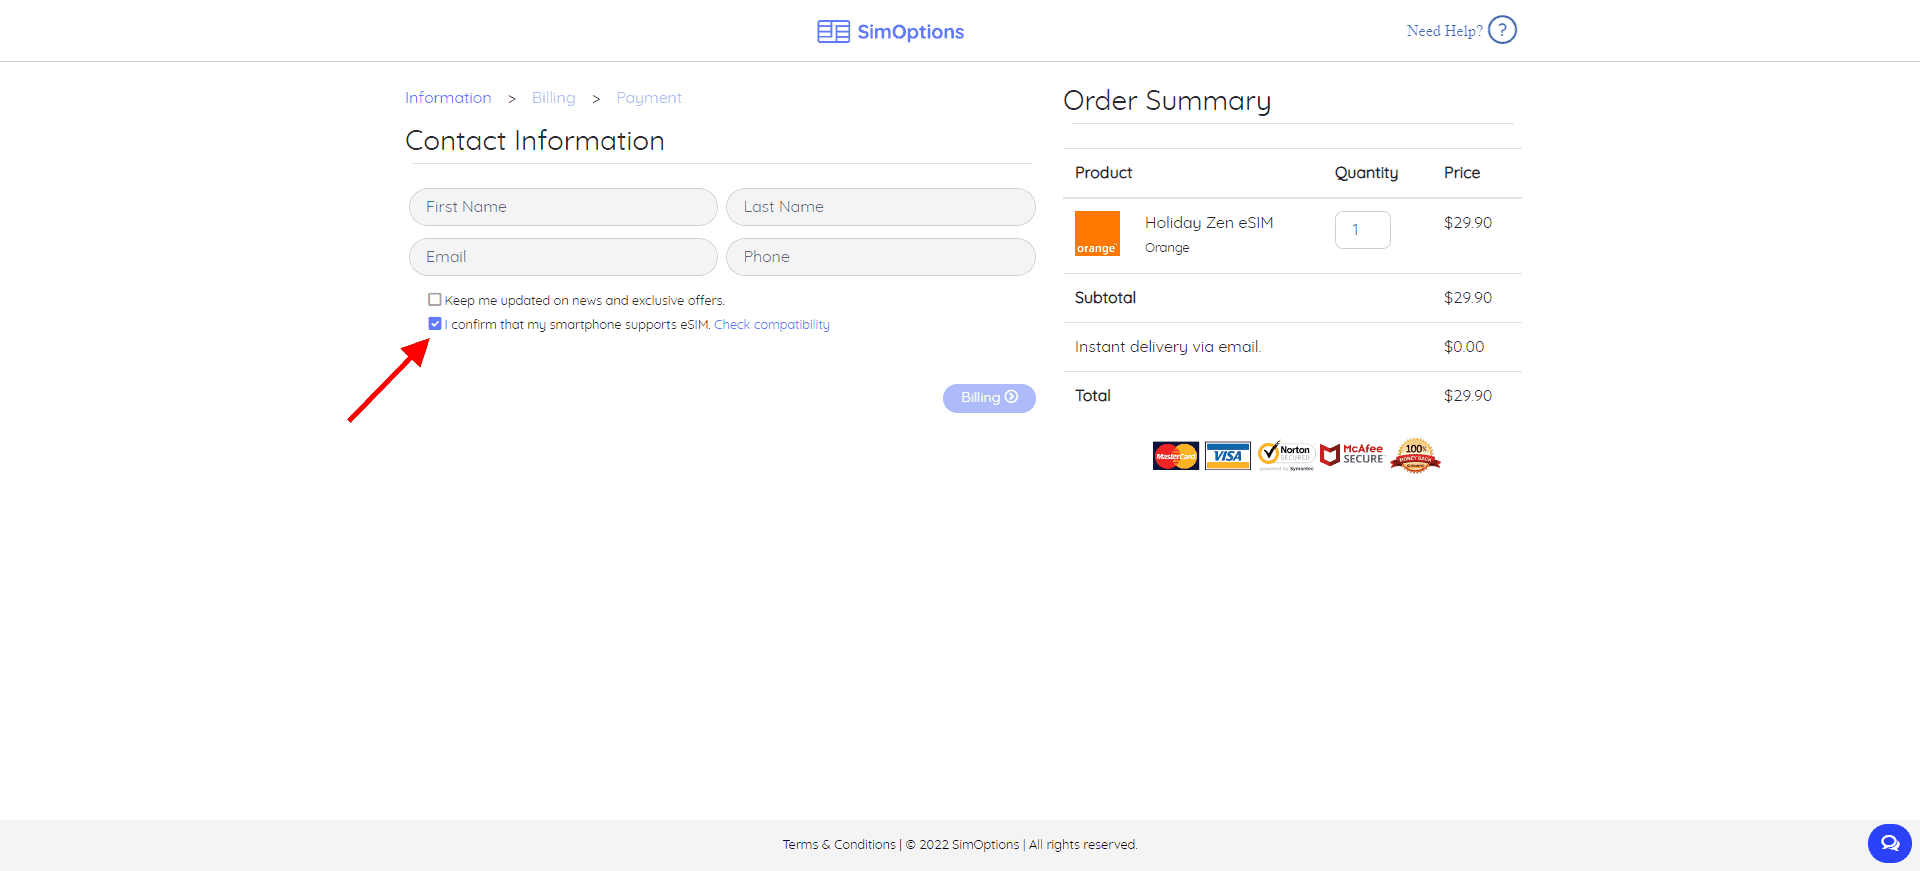 simoptions checkout page with a red arrow pointing to the box to confirm that the smartphone is esim compatible